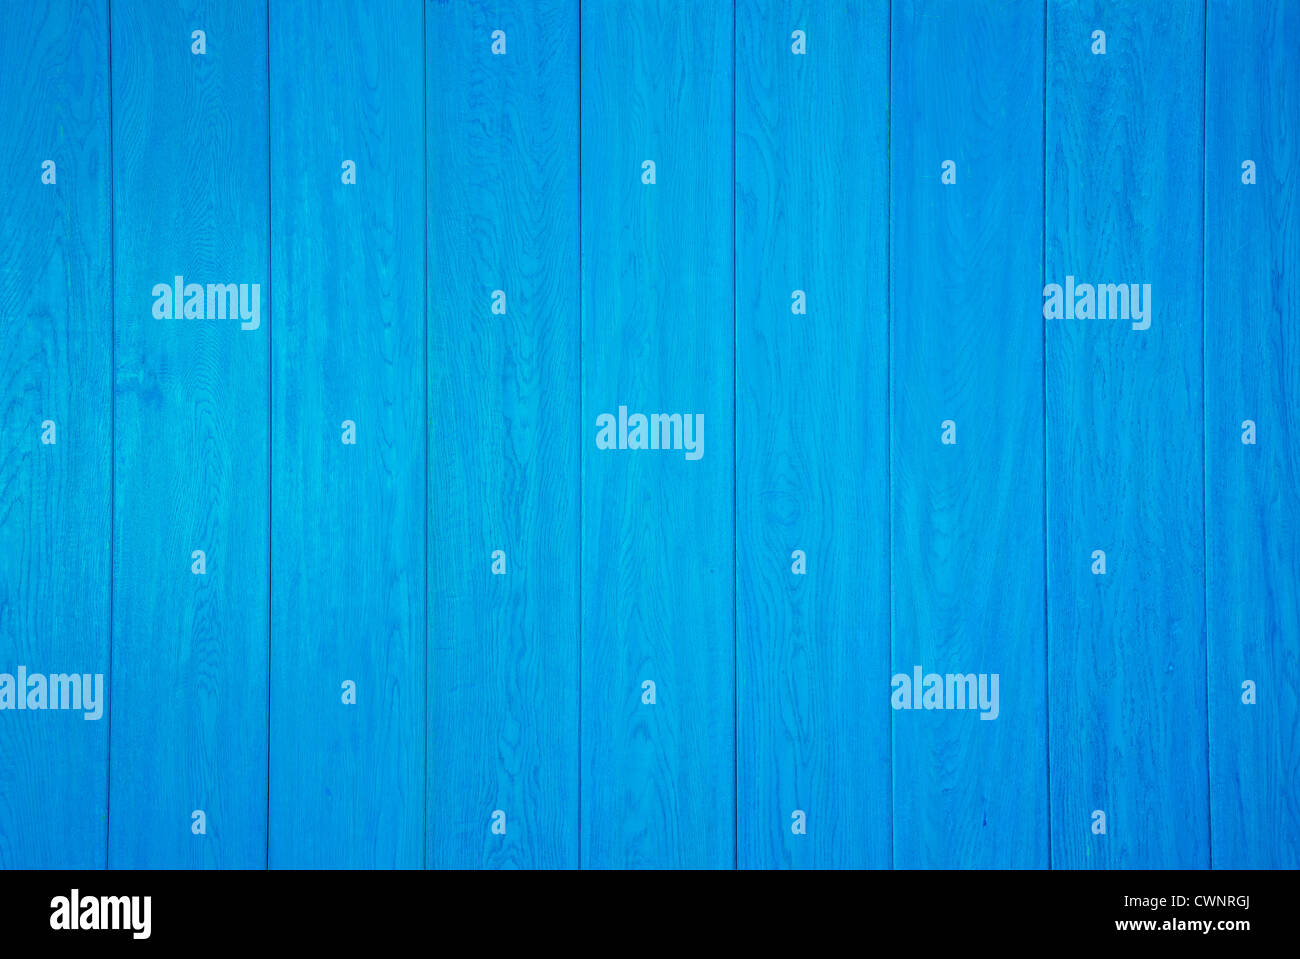 Wooden wall painted bright blue Stock Photo